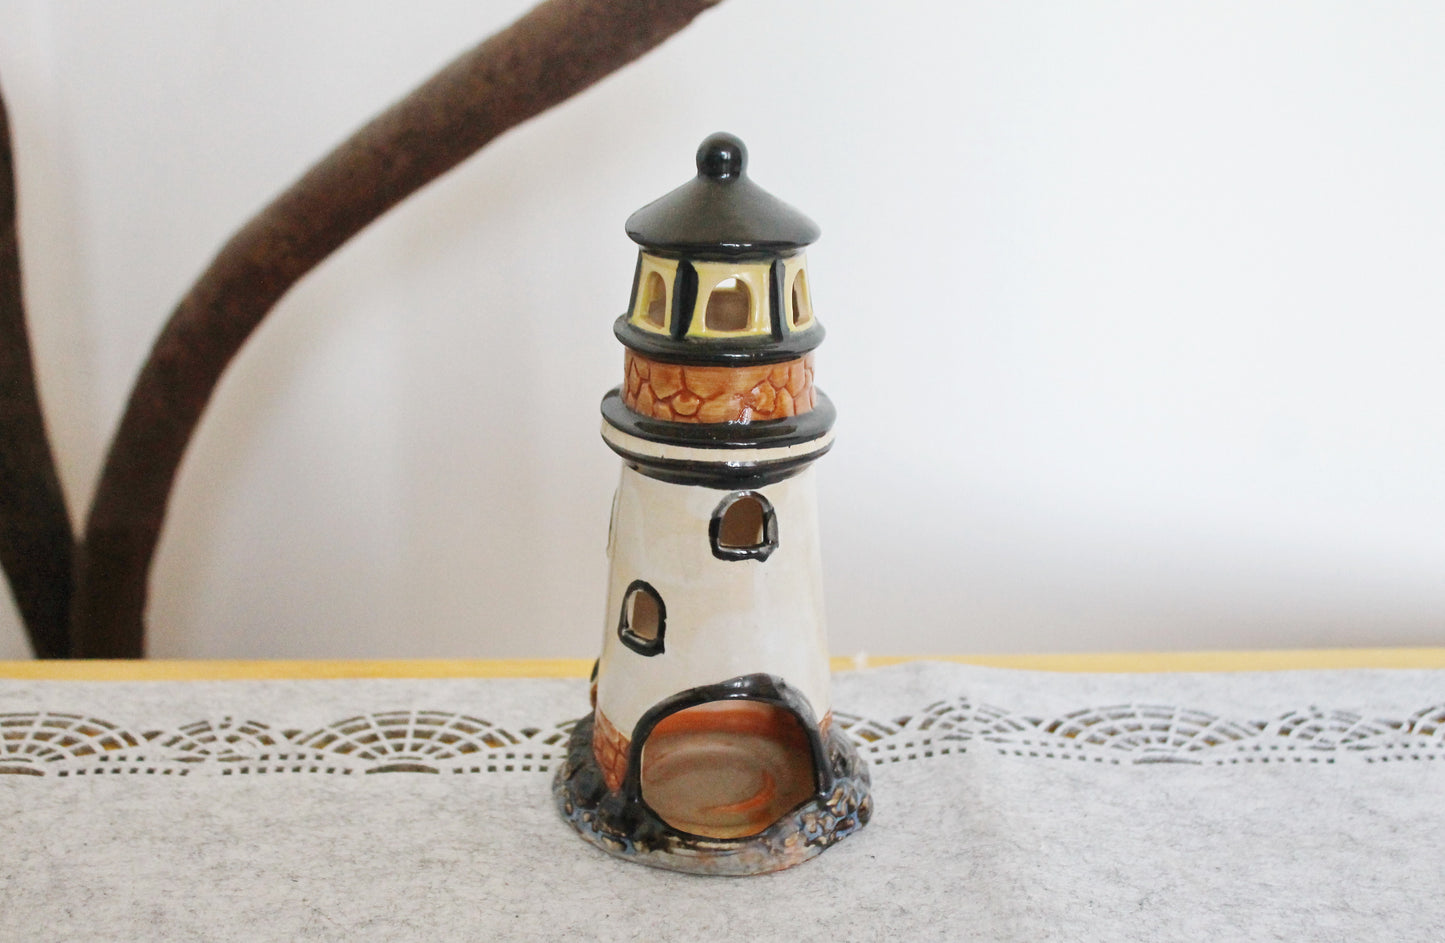 Lighthouse vintage ceramic Candle holder for one tealight candle - 7.9 inches - Germany vintage - 1990s